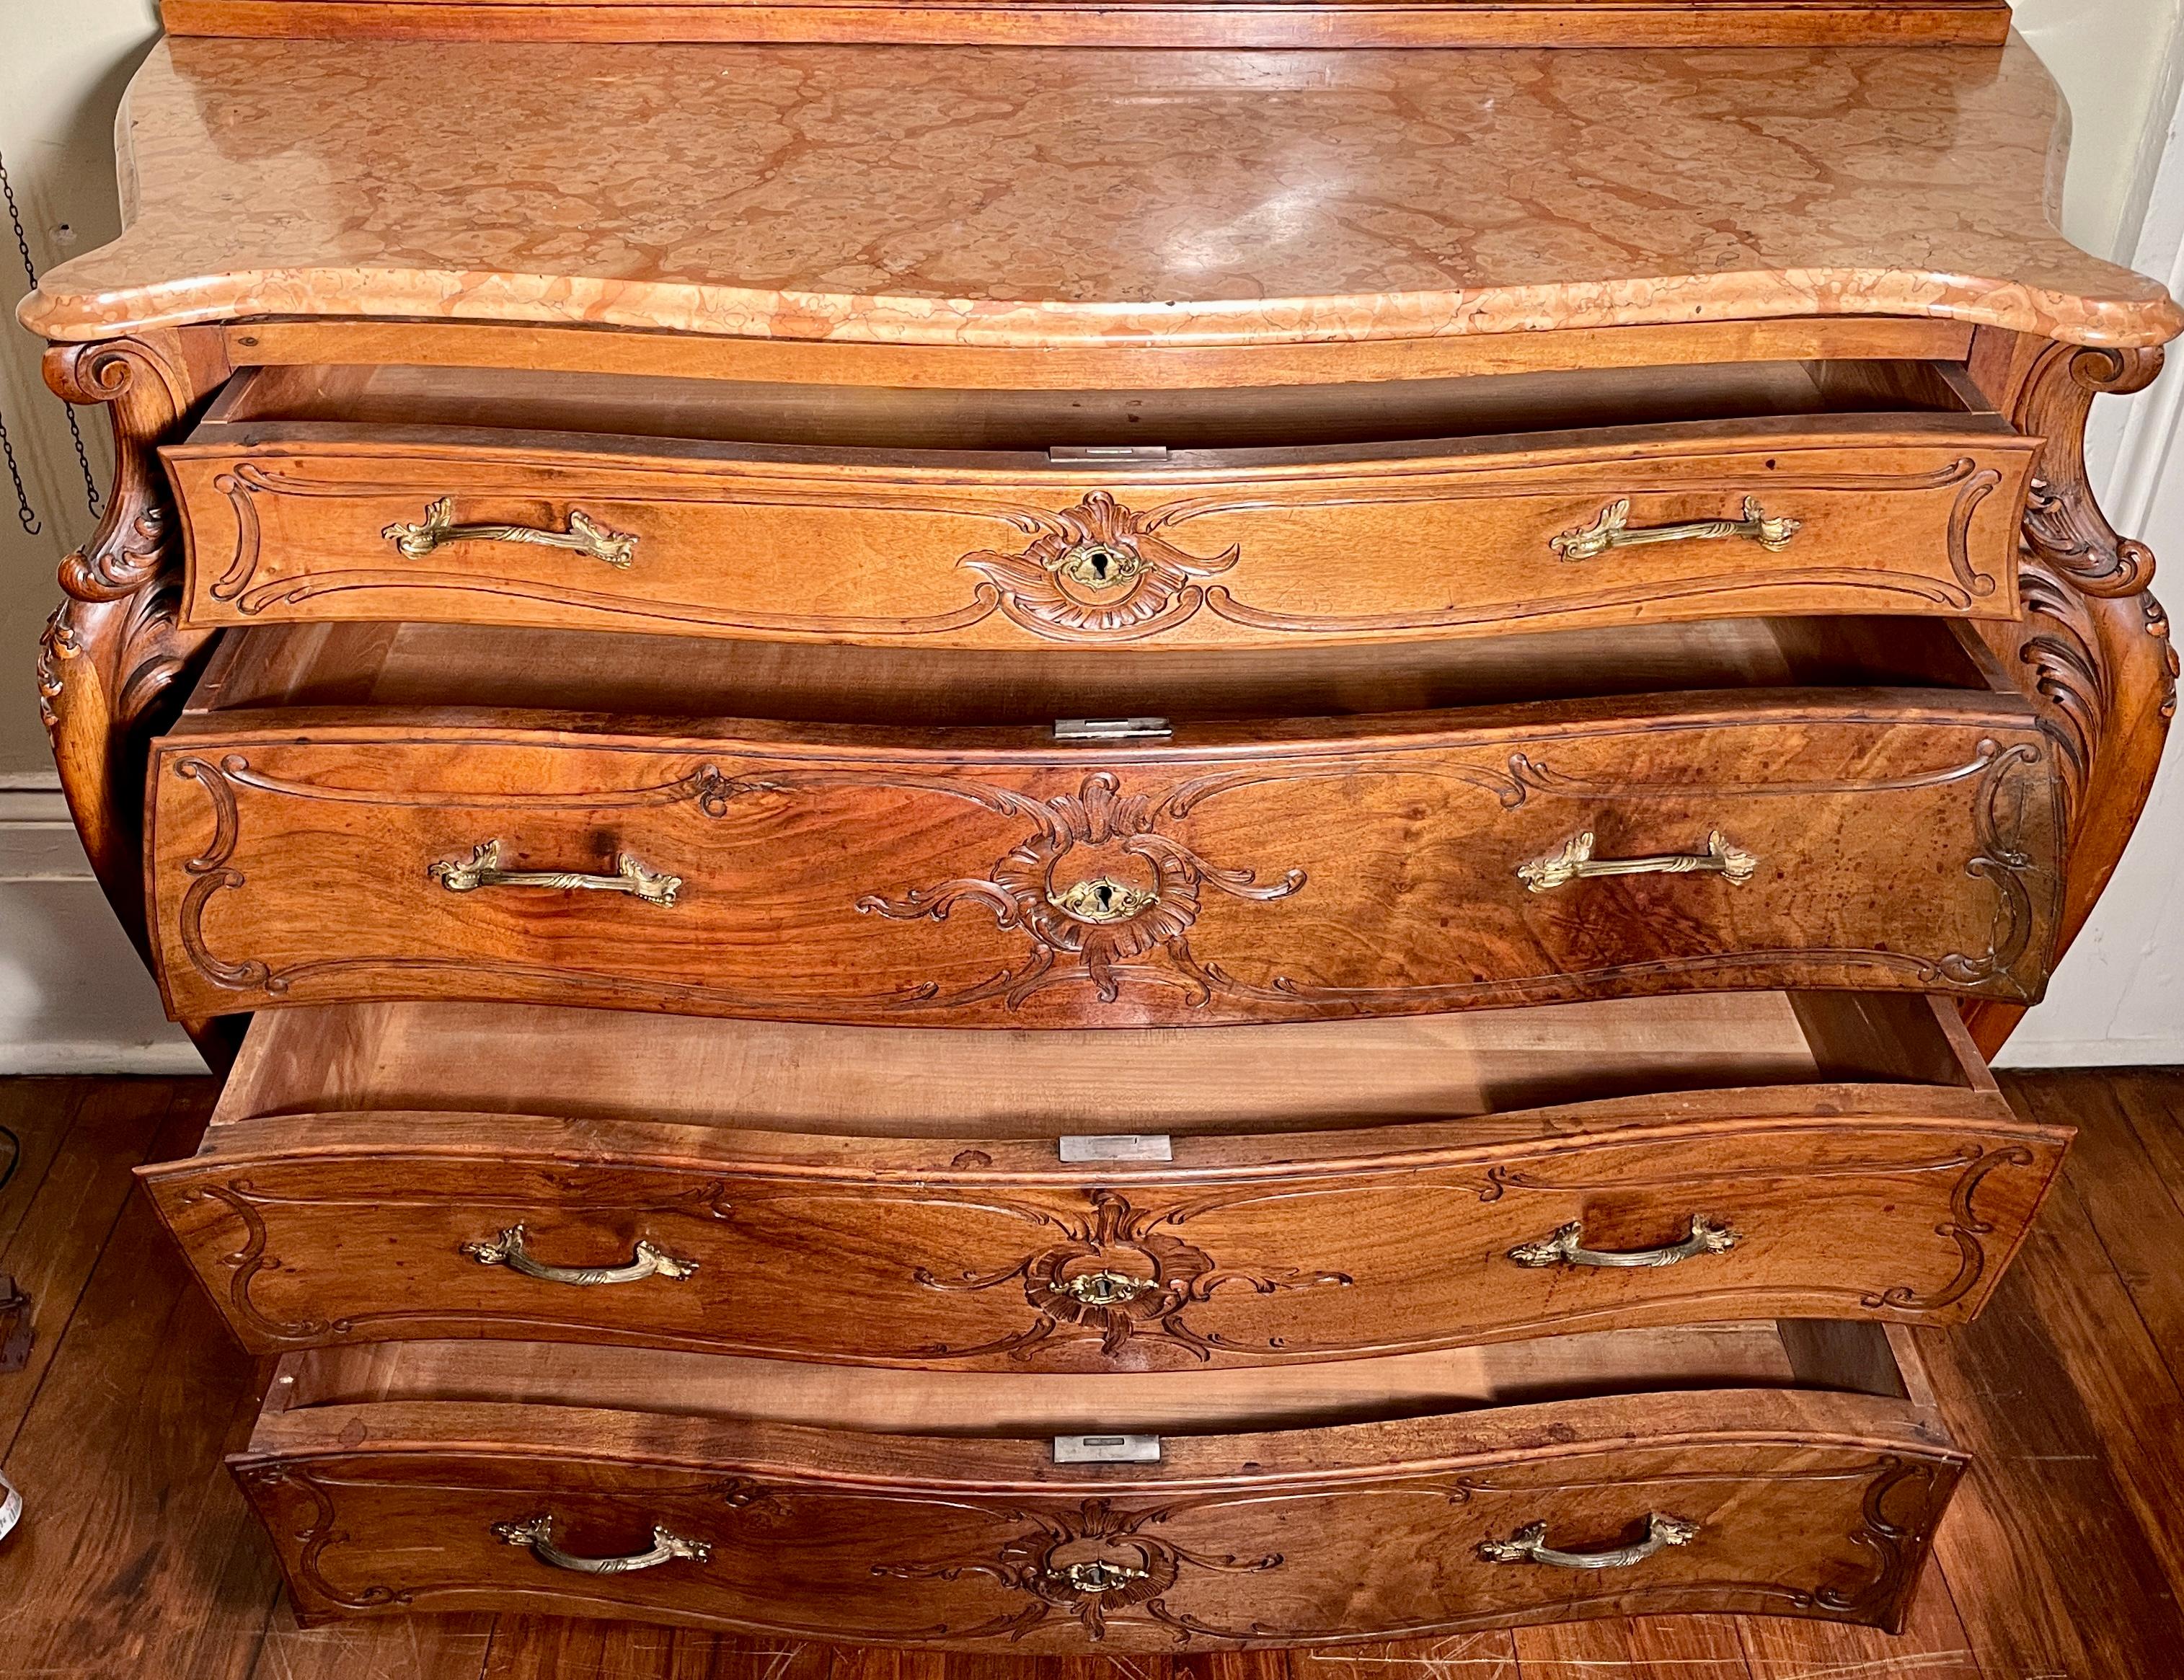 Antique French Walnut & Marble-Top Bombè Chest of Drawers with Mirror Circa 1890 For Sale 2